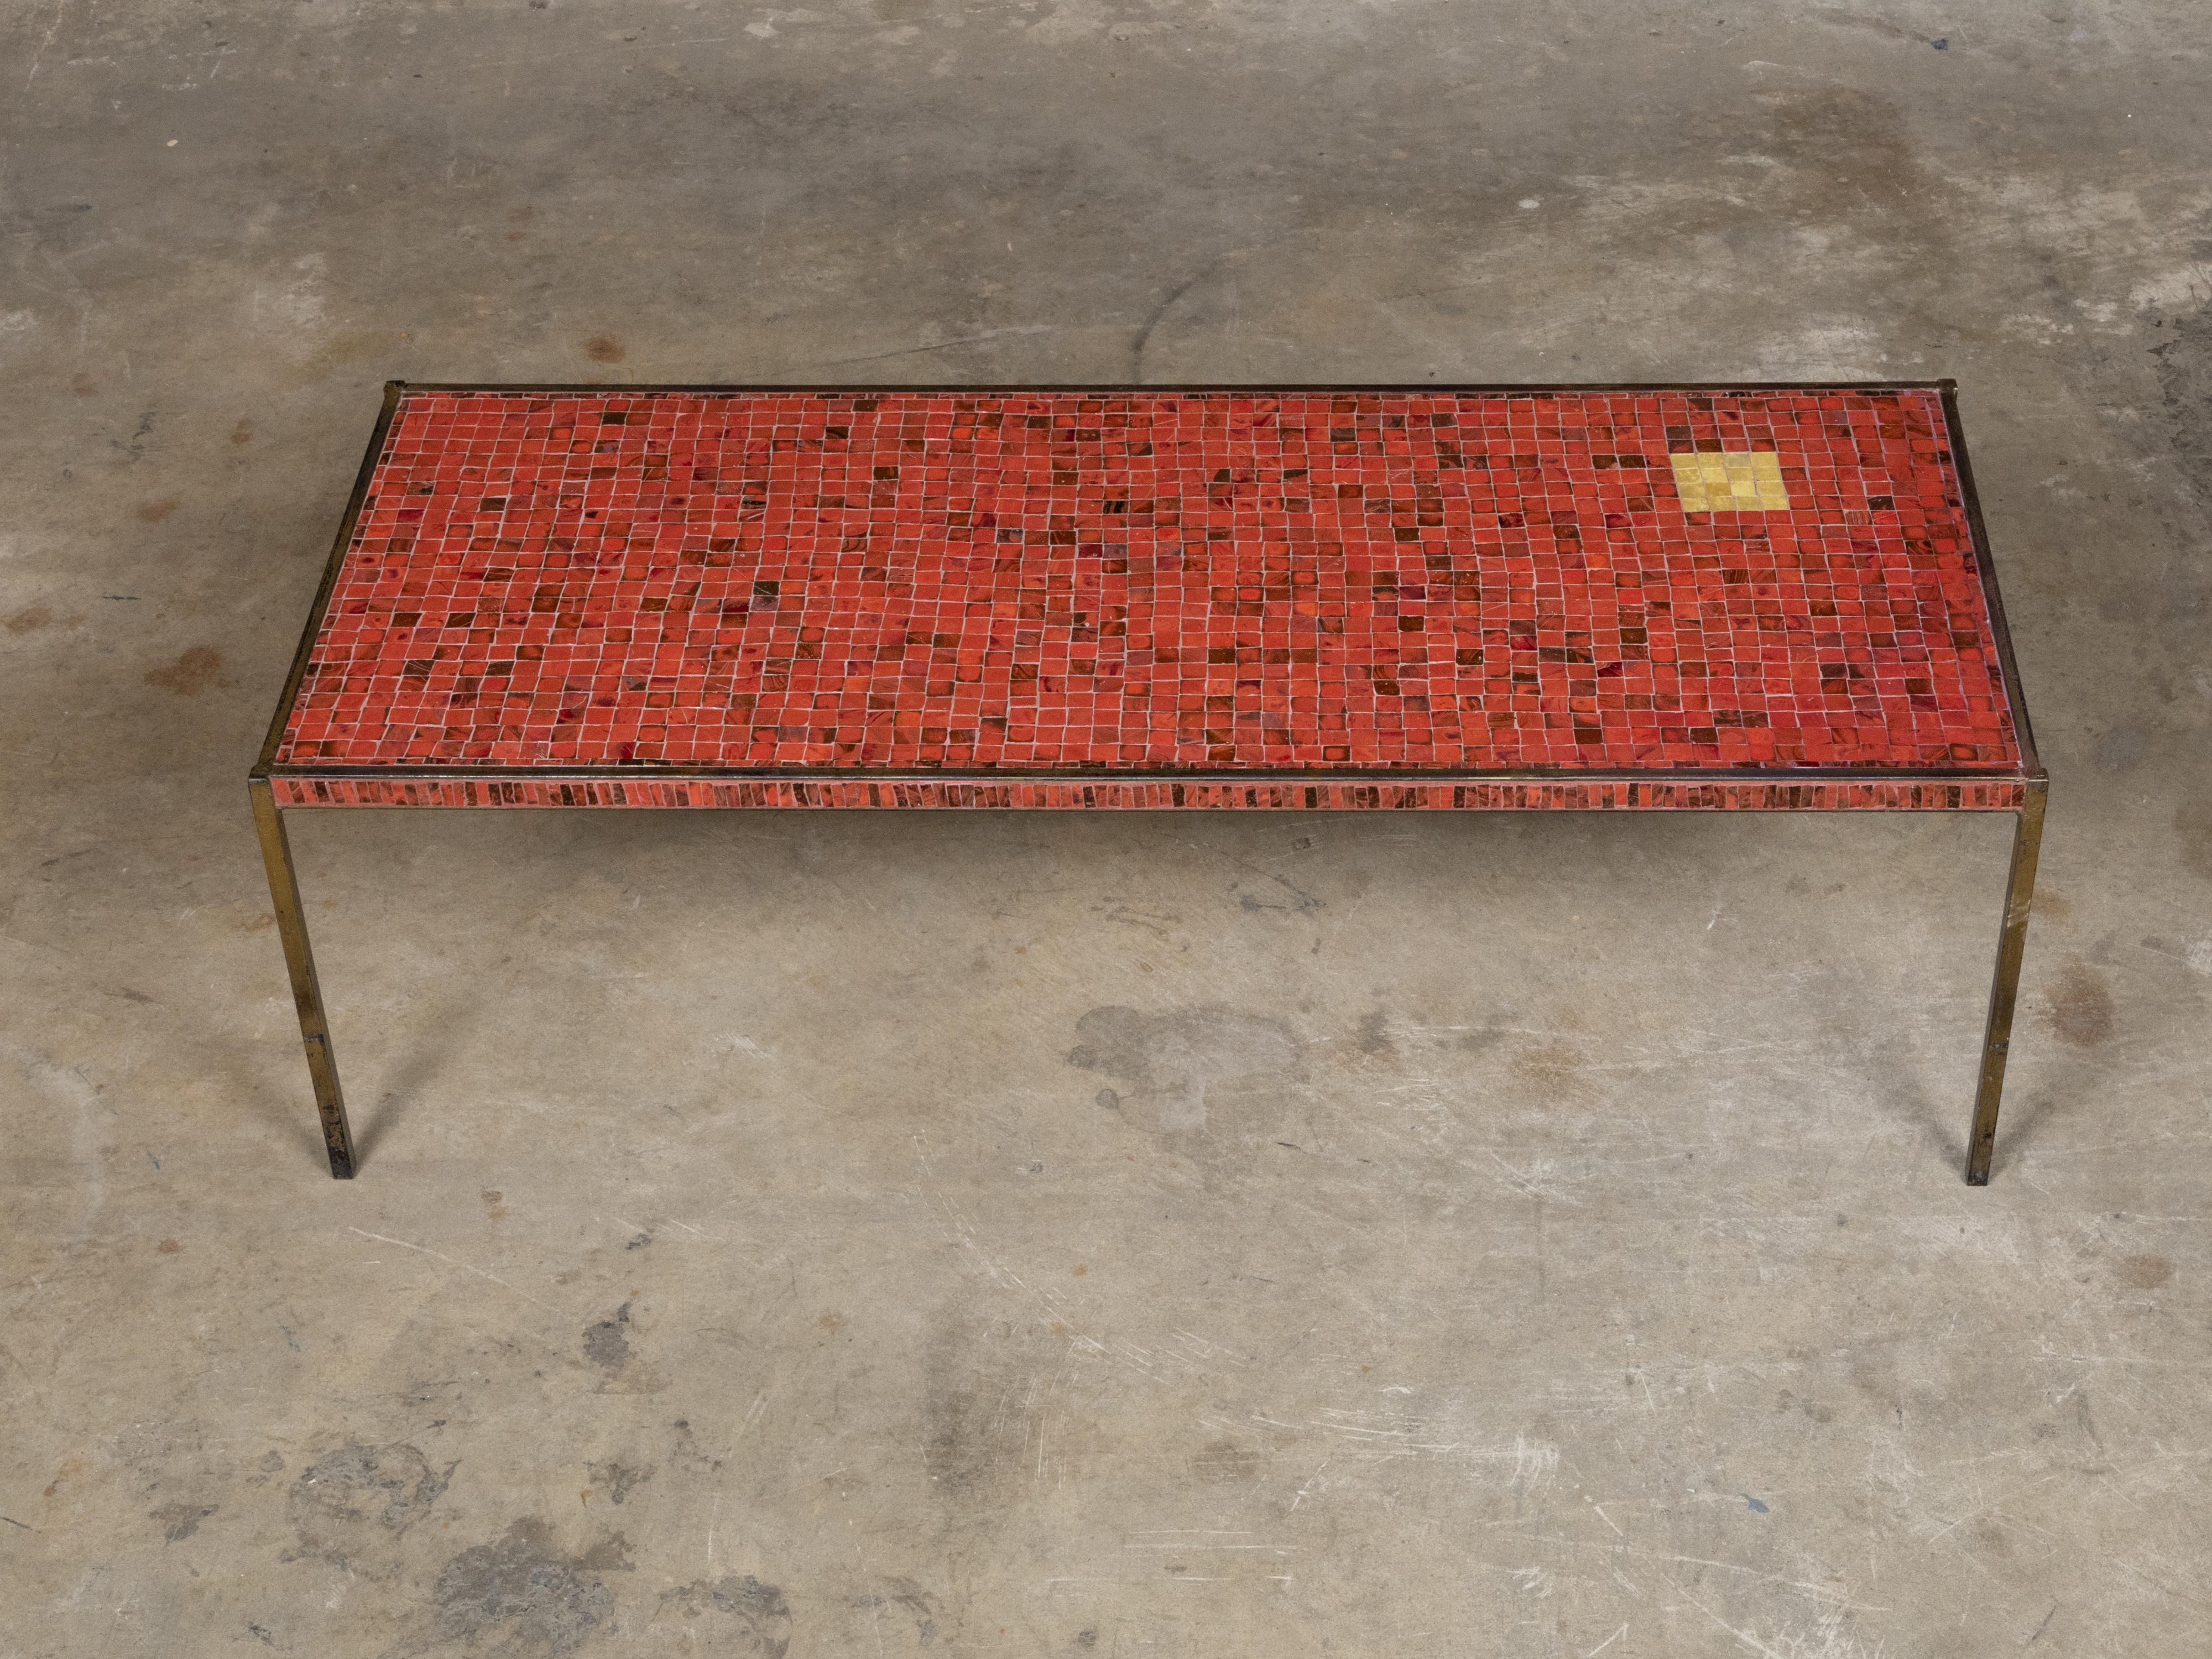 20th Century Midcentury Italian Mosaic Table with Iron Base and Red Glass Tile Style Top For Sale